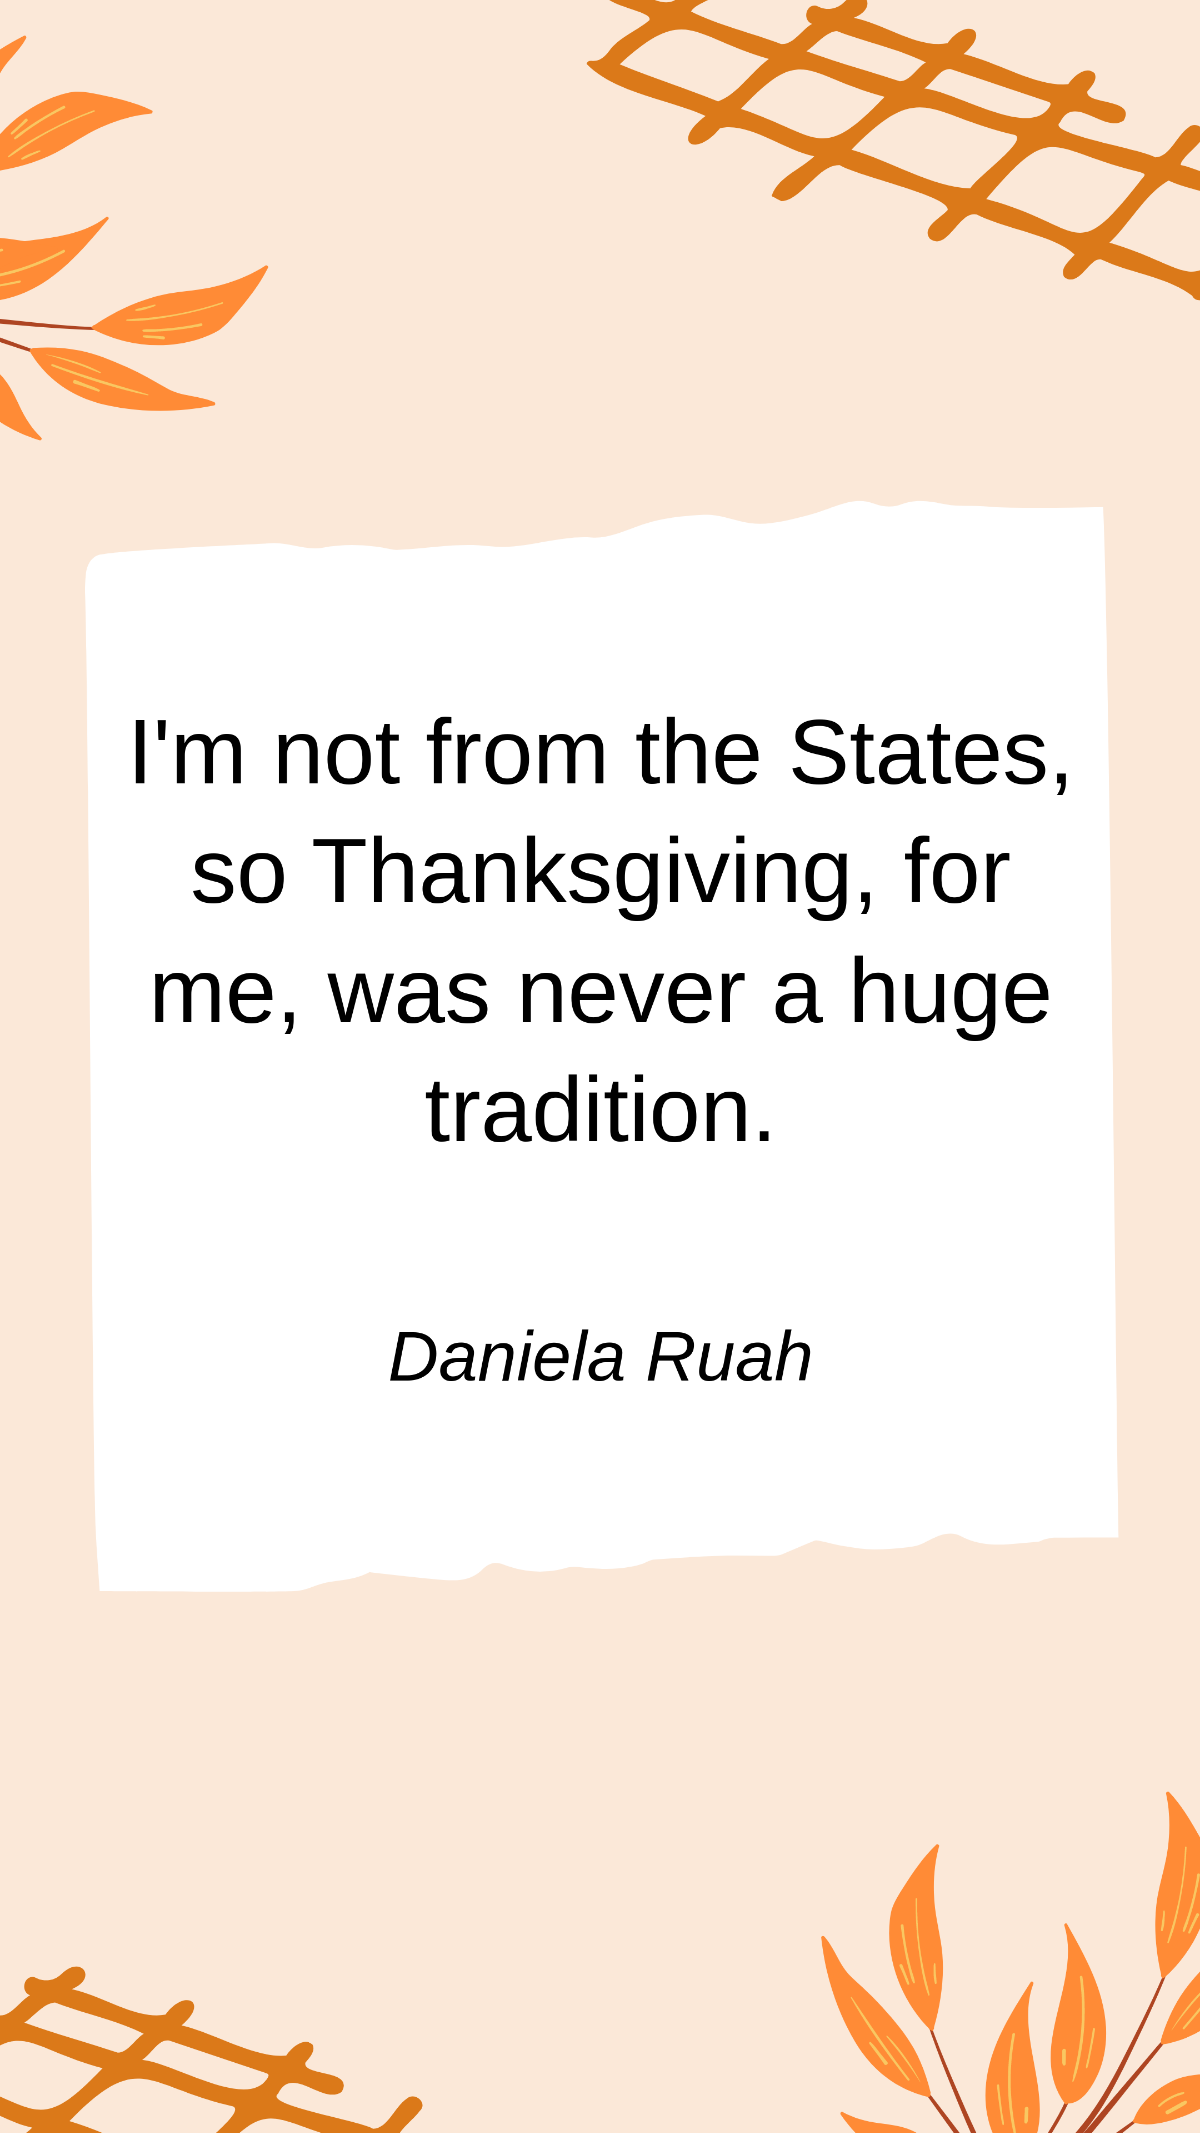 Daniela Ruah - I'm not from the States, so Thanksgiving, for me, was never a huge tradition. Template